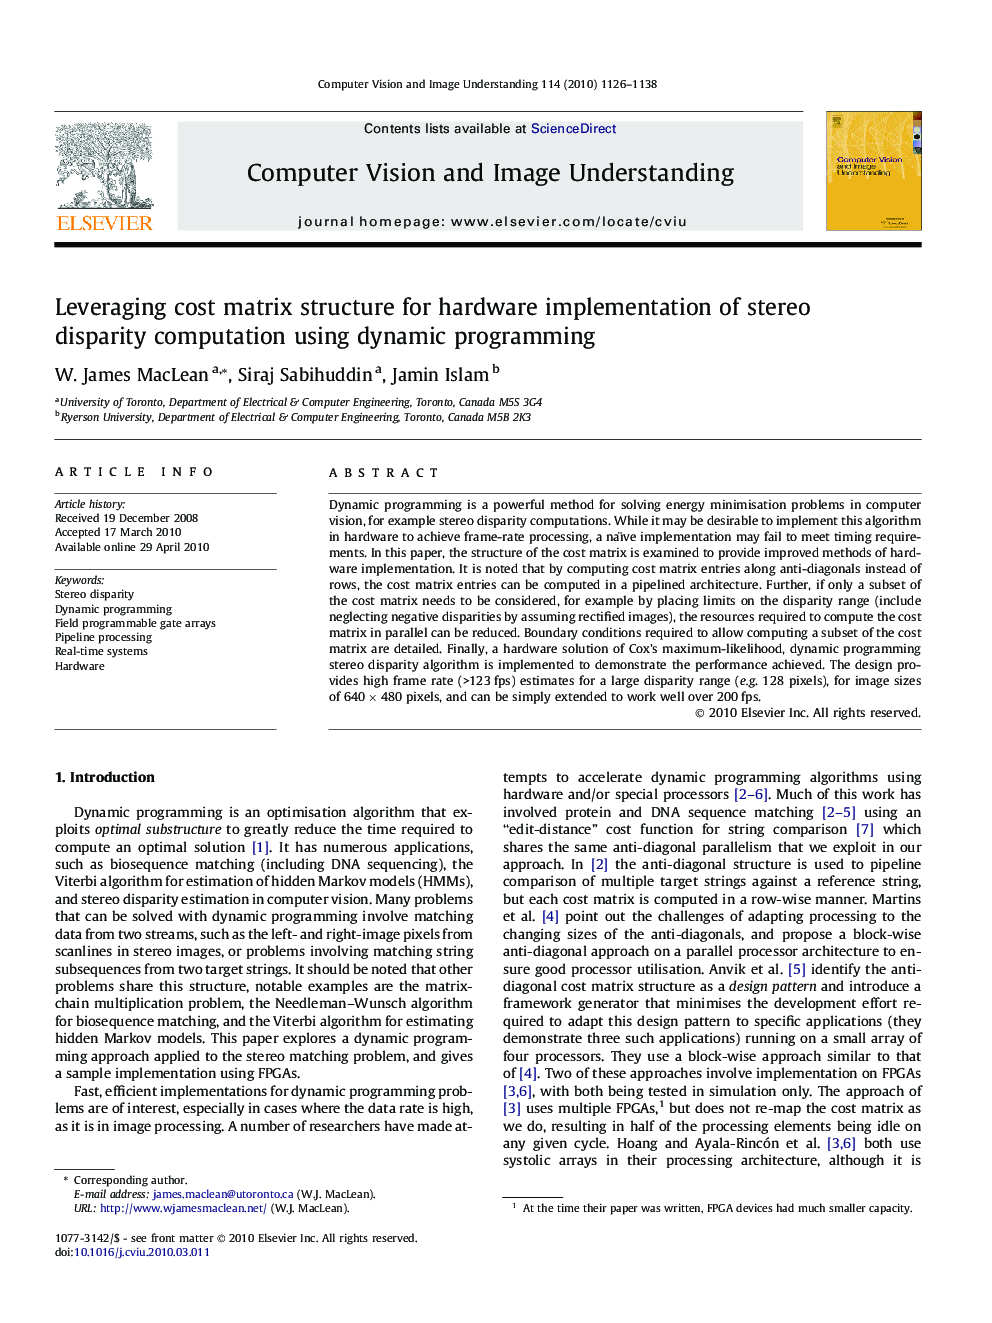 Leveraging cost matrix structure for hardware implementation of stereo disparity computation using dynamic programming